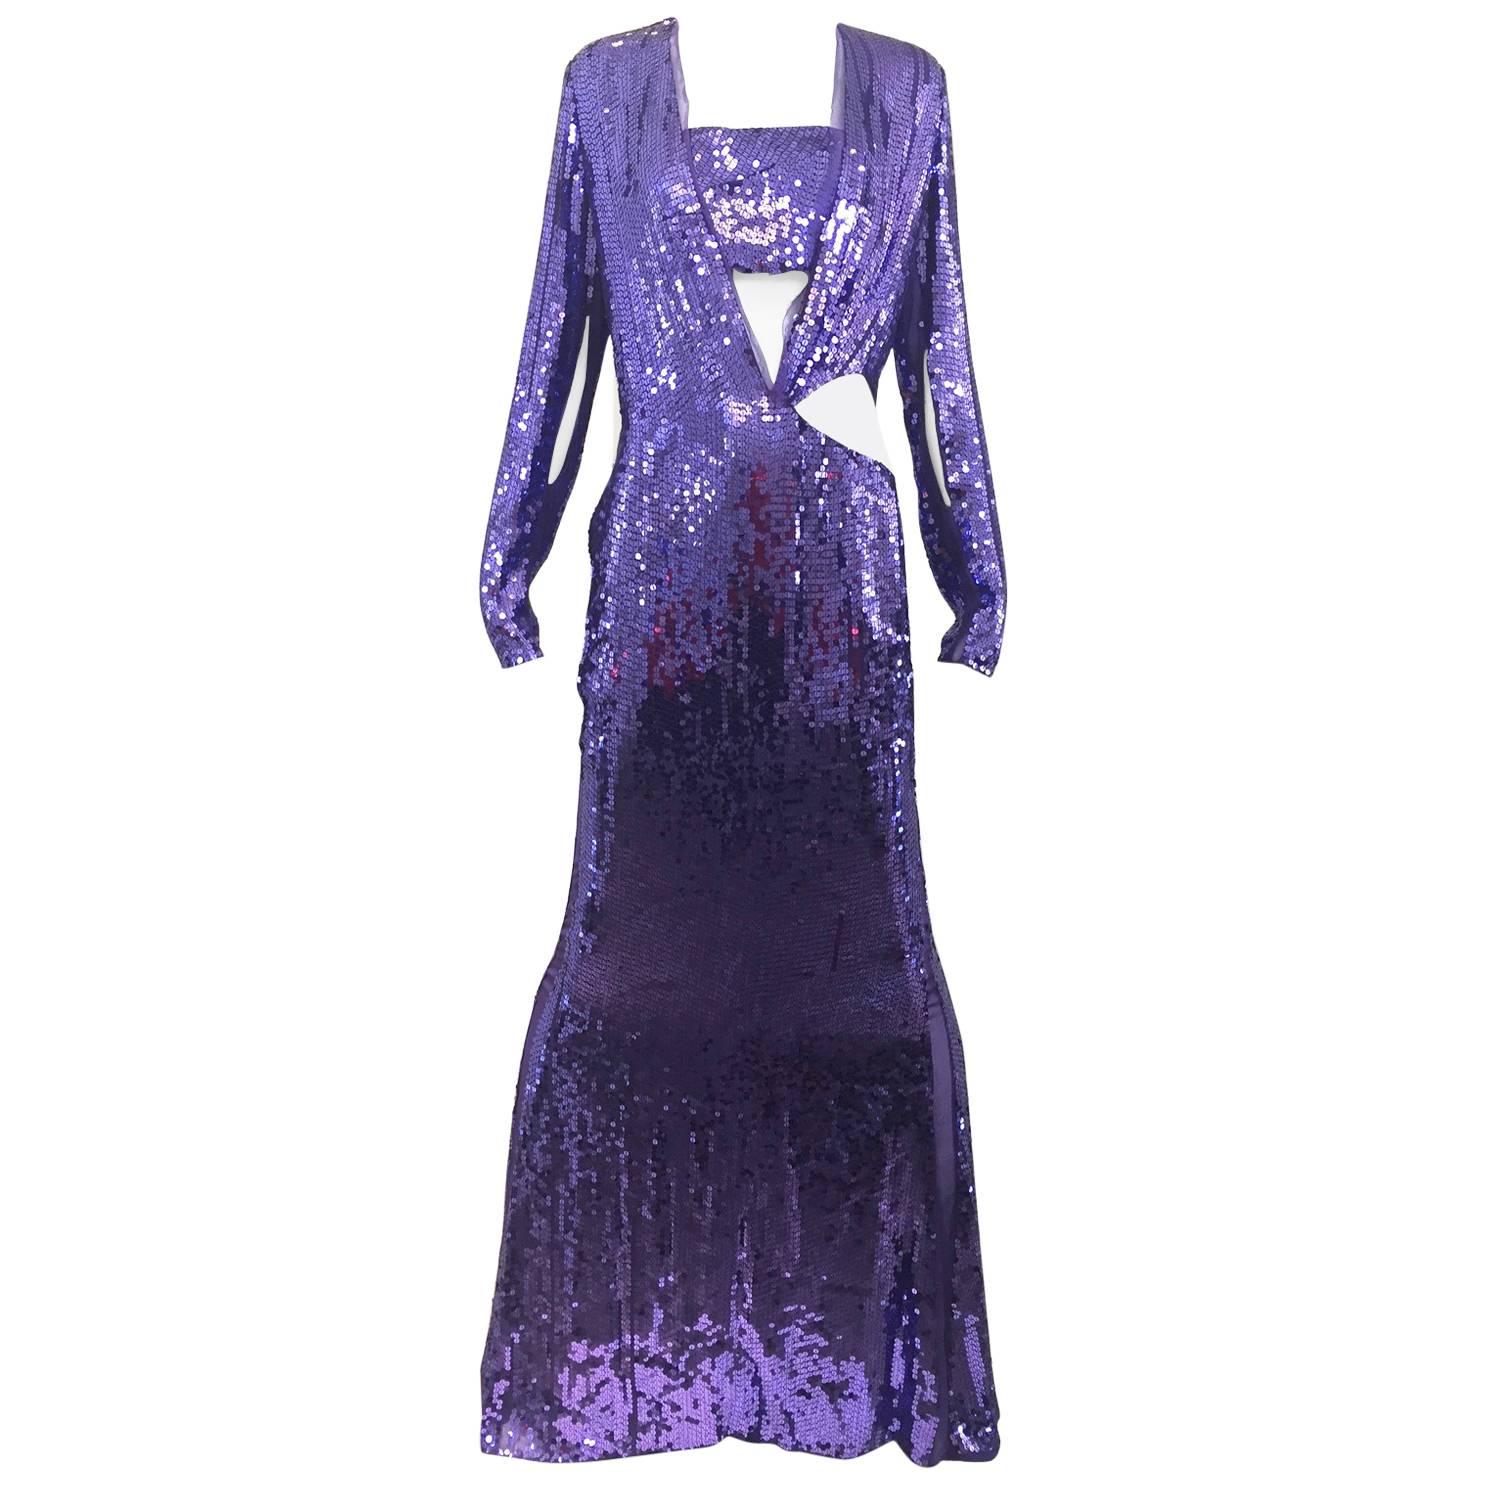 2004 GUCCI by Tom Ford runway purple sequin gown